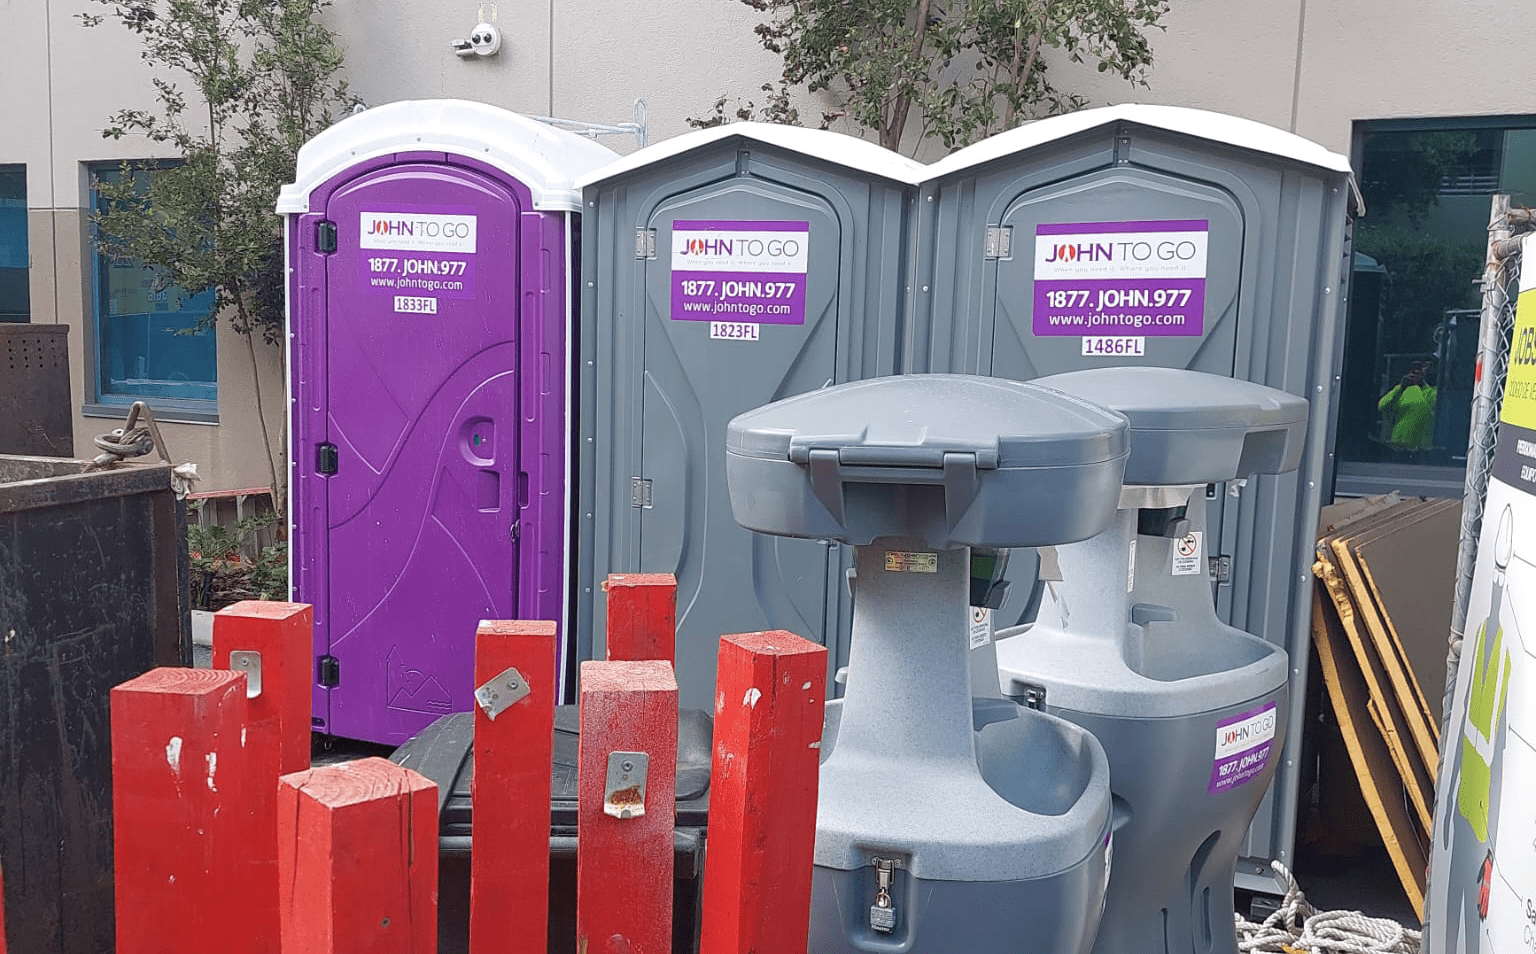 Portable hand washing station between porta potties at outdoor event